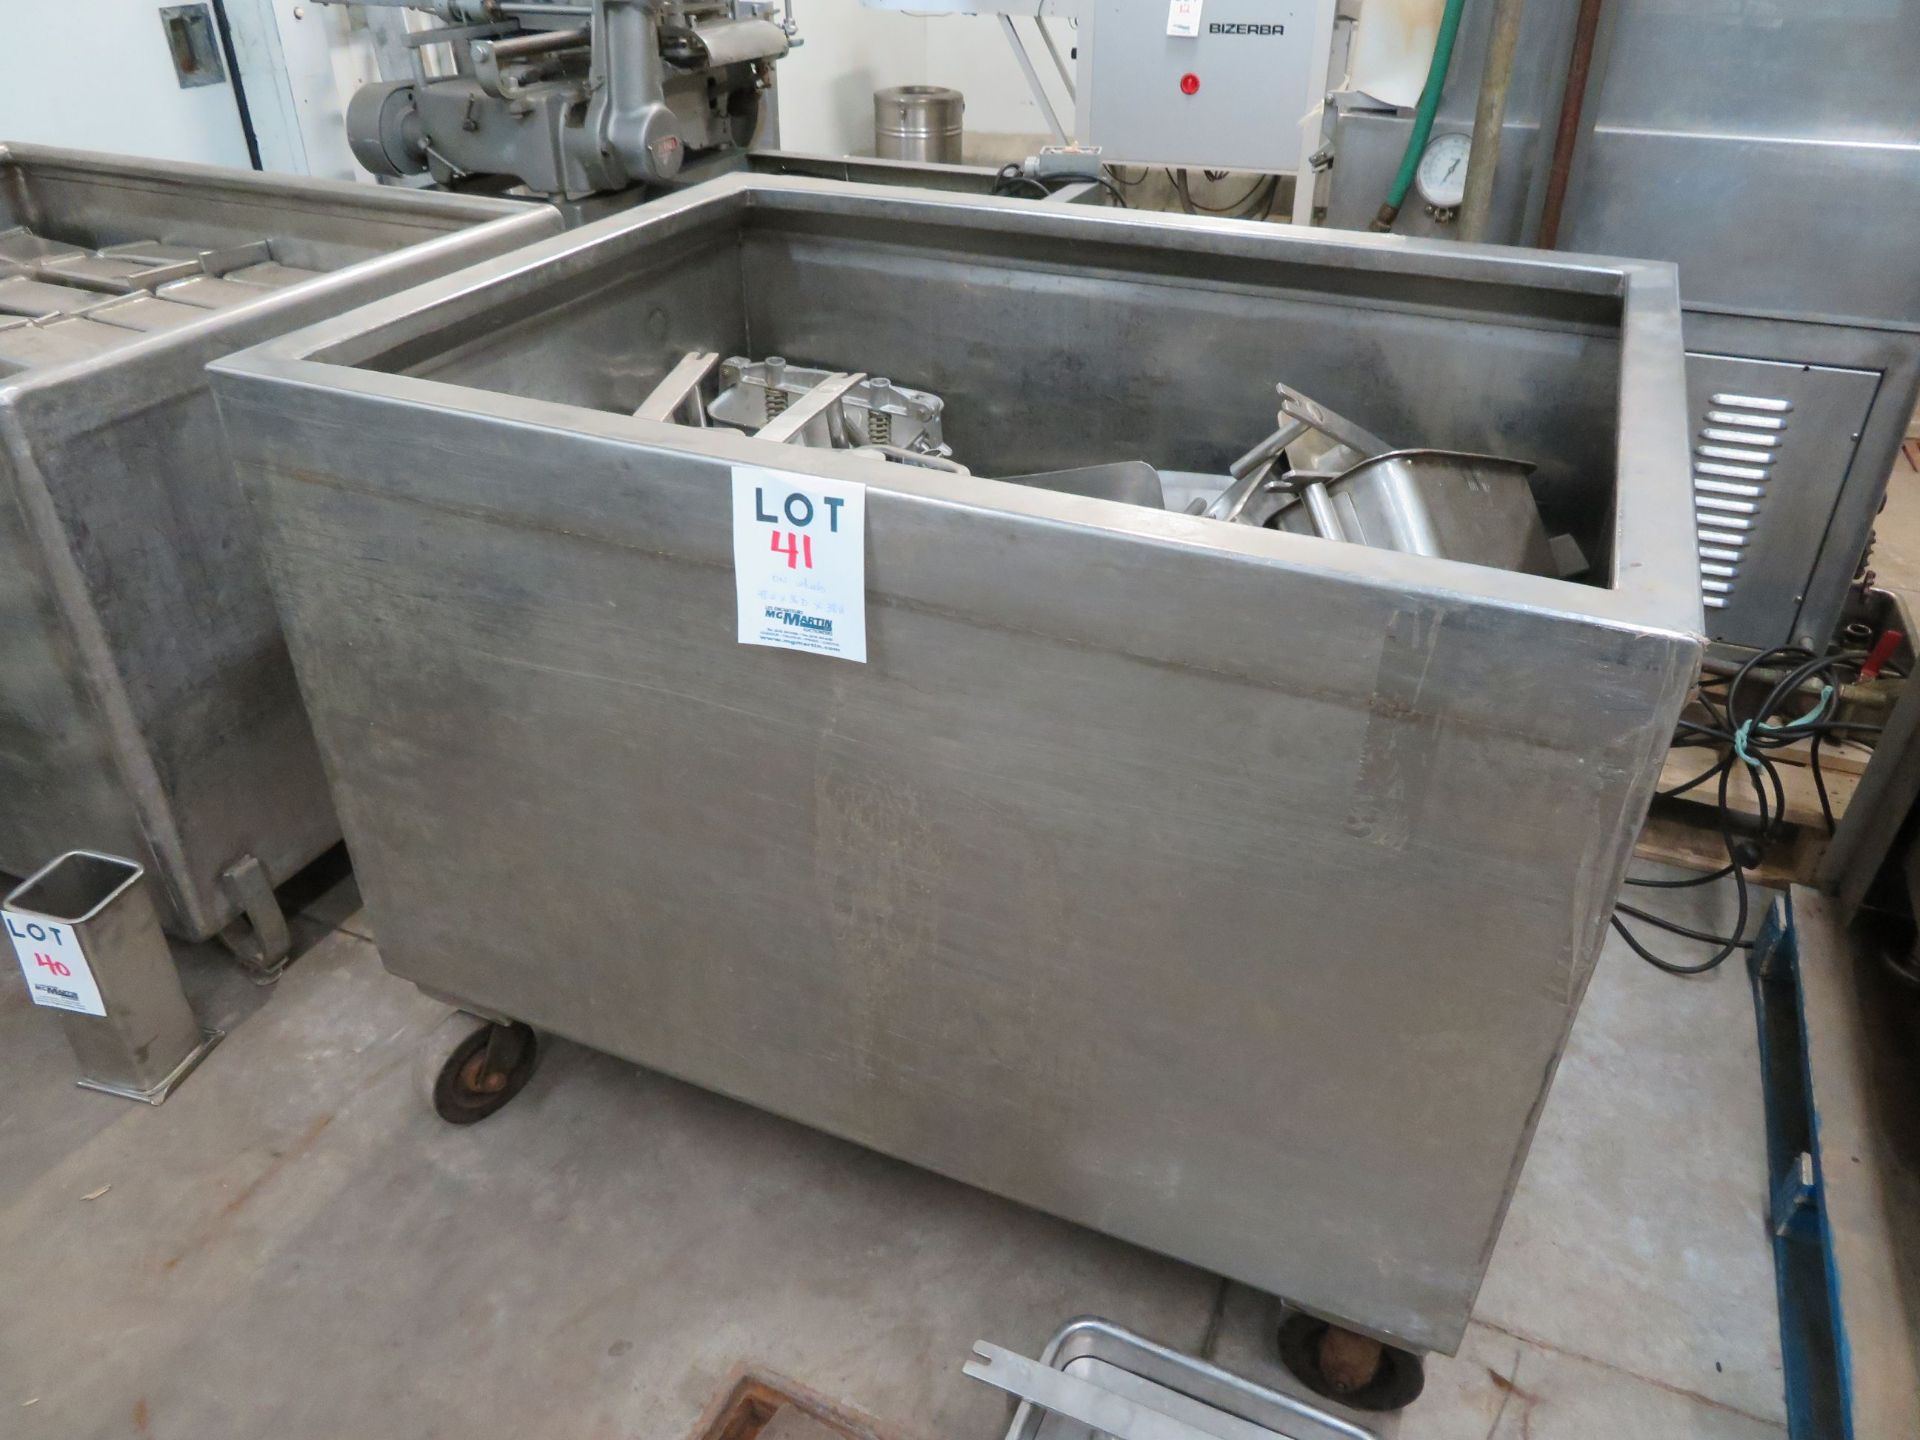 Stainless steel tub approx. 48"w x 36"d x 38"h